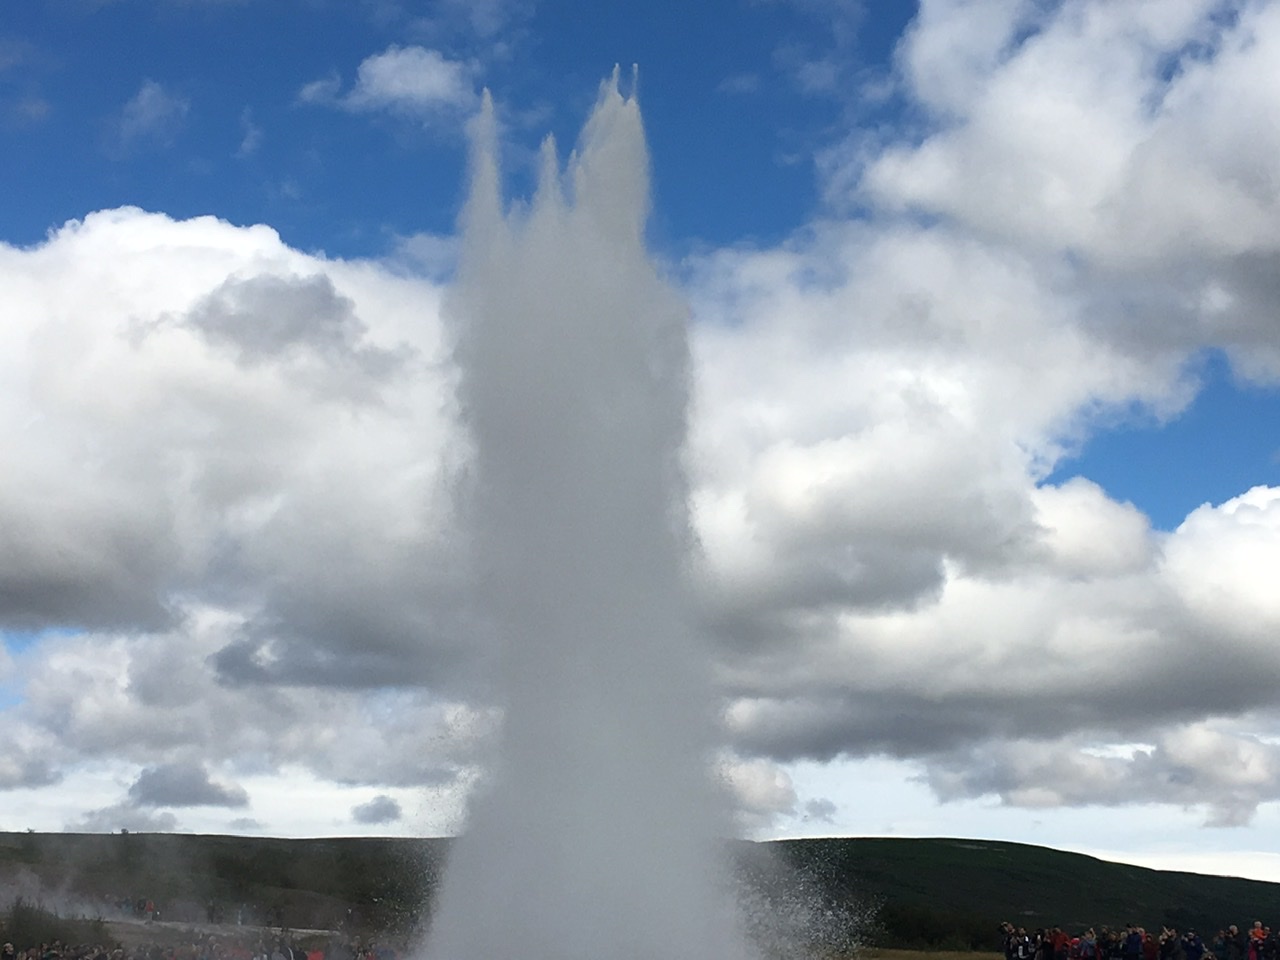 Stokkur Geyser spurts water high into the air